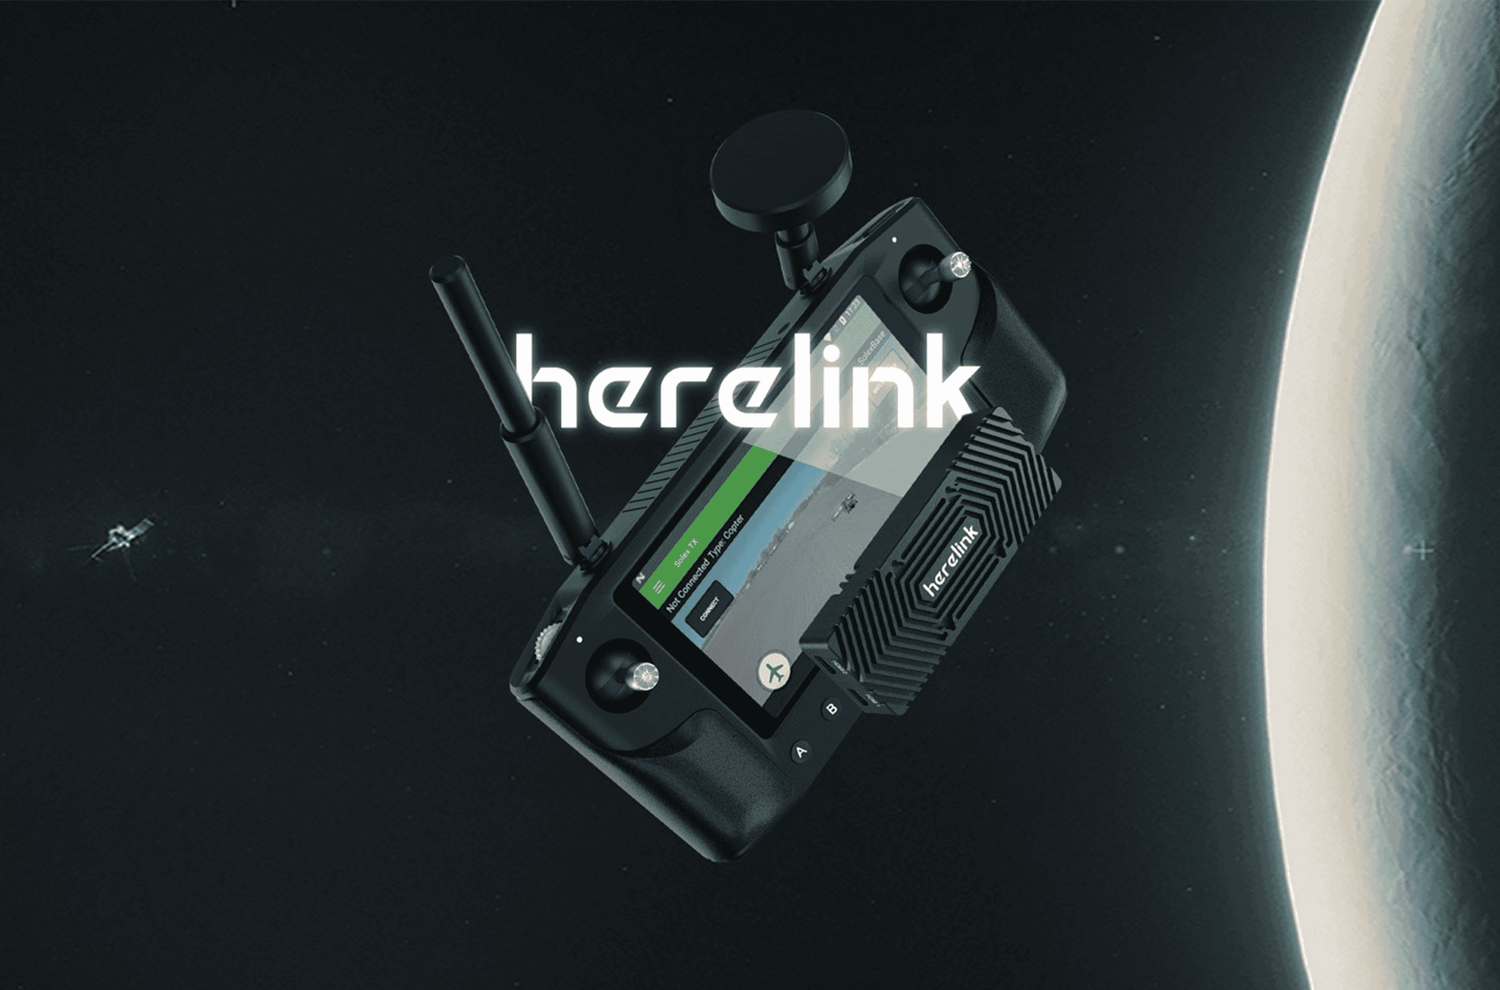 Herelink controller against a dark space background with a view of Earth and a small satellite in the distance, highlighting the advanced and futuristic technology of the Herelink system.